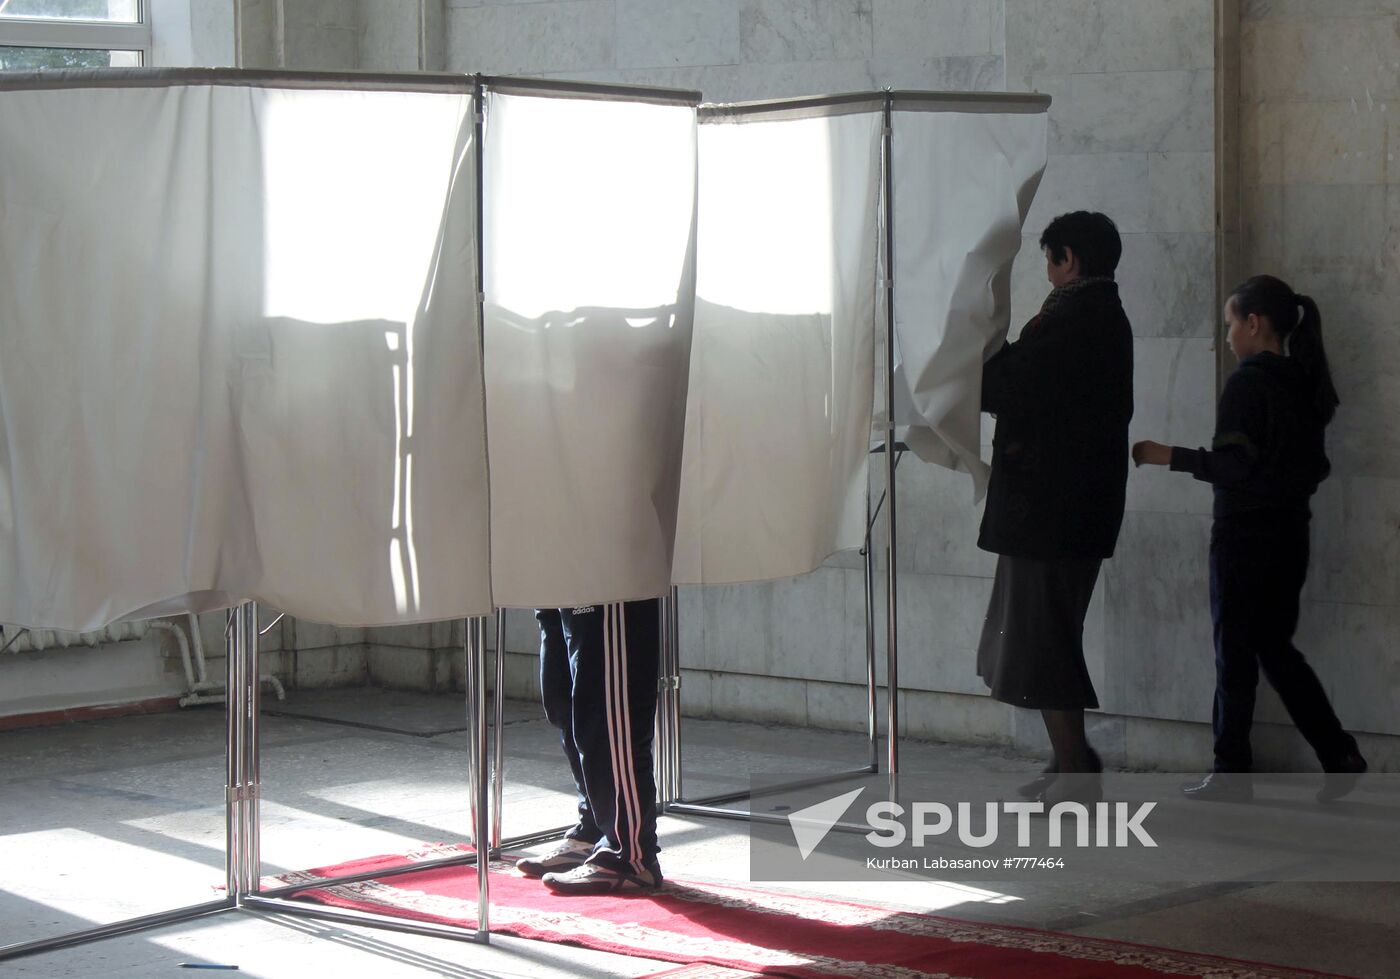 Dagestan's Makhachkala residents vote in mayoral election